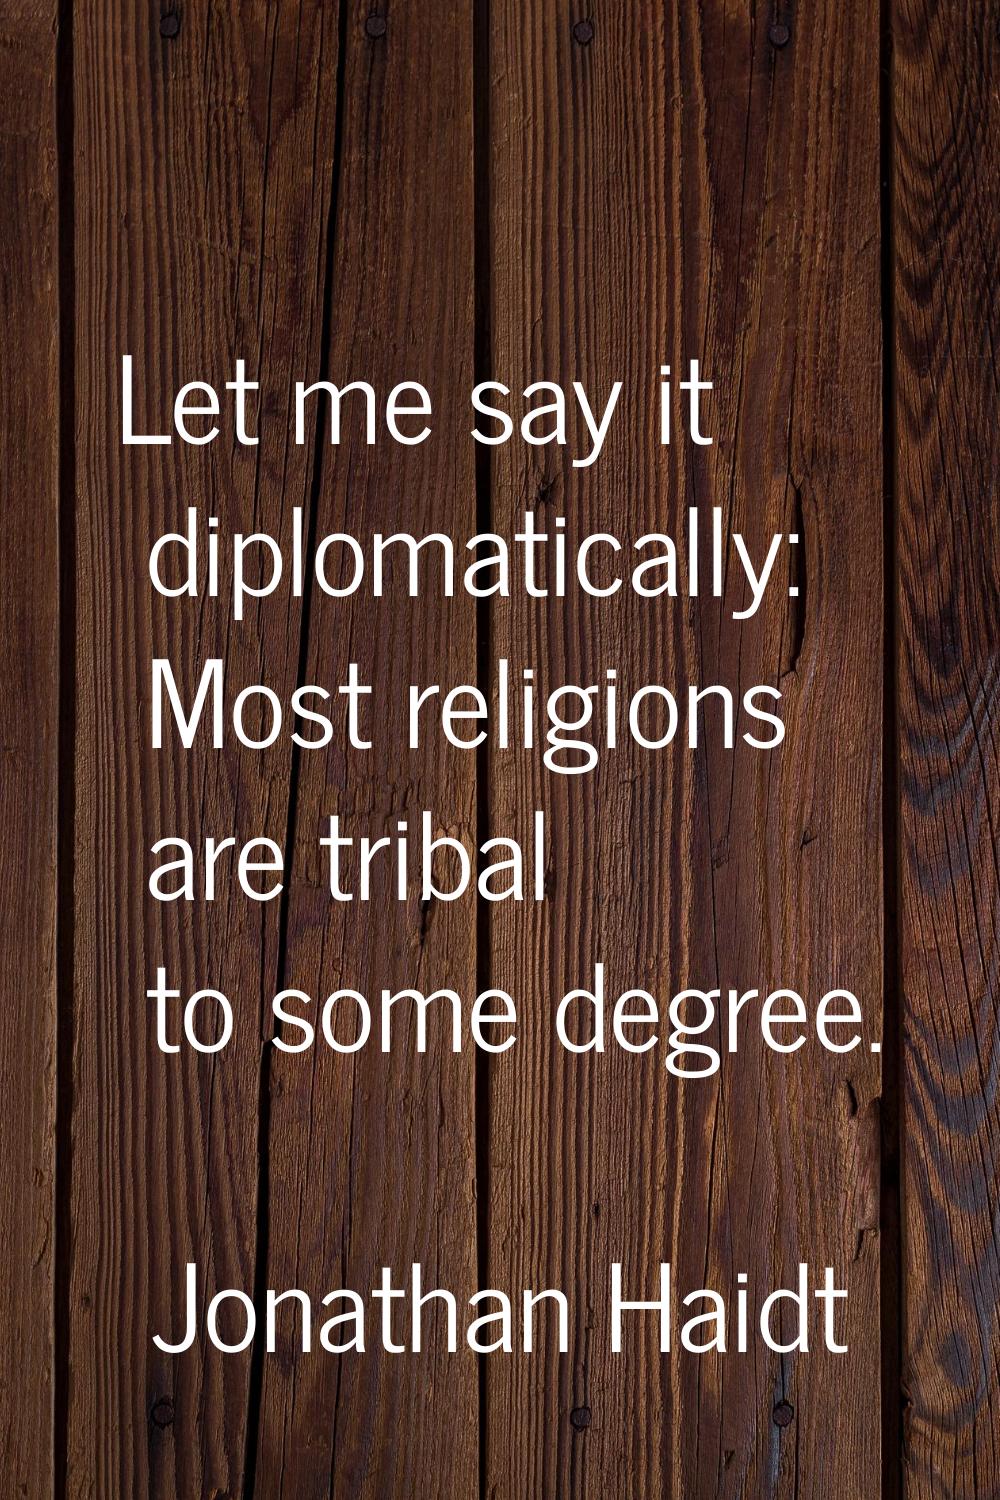 Let me say it diplomatically: Most religions are tribal to some degree.